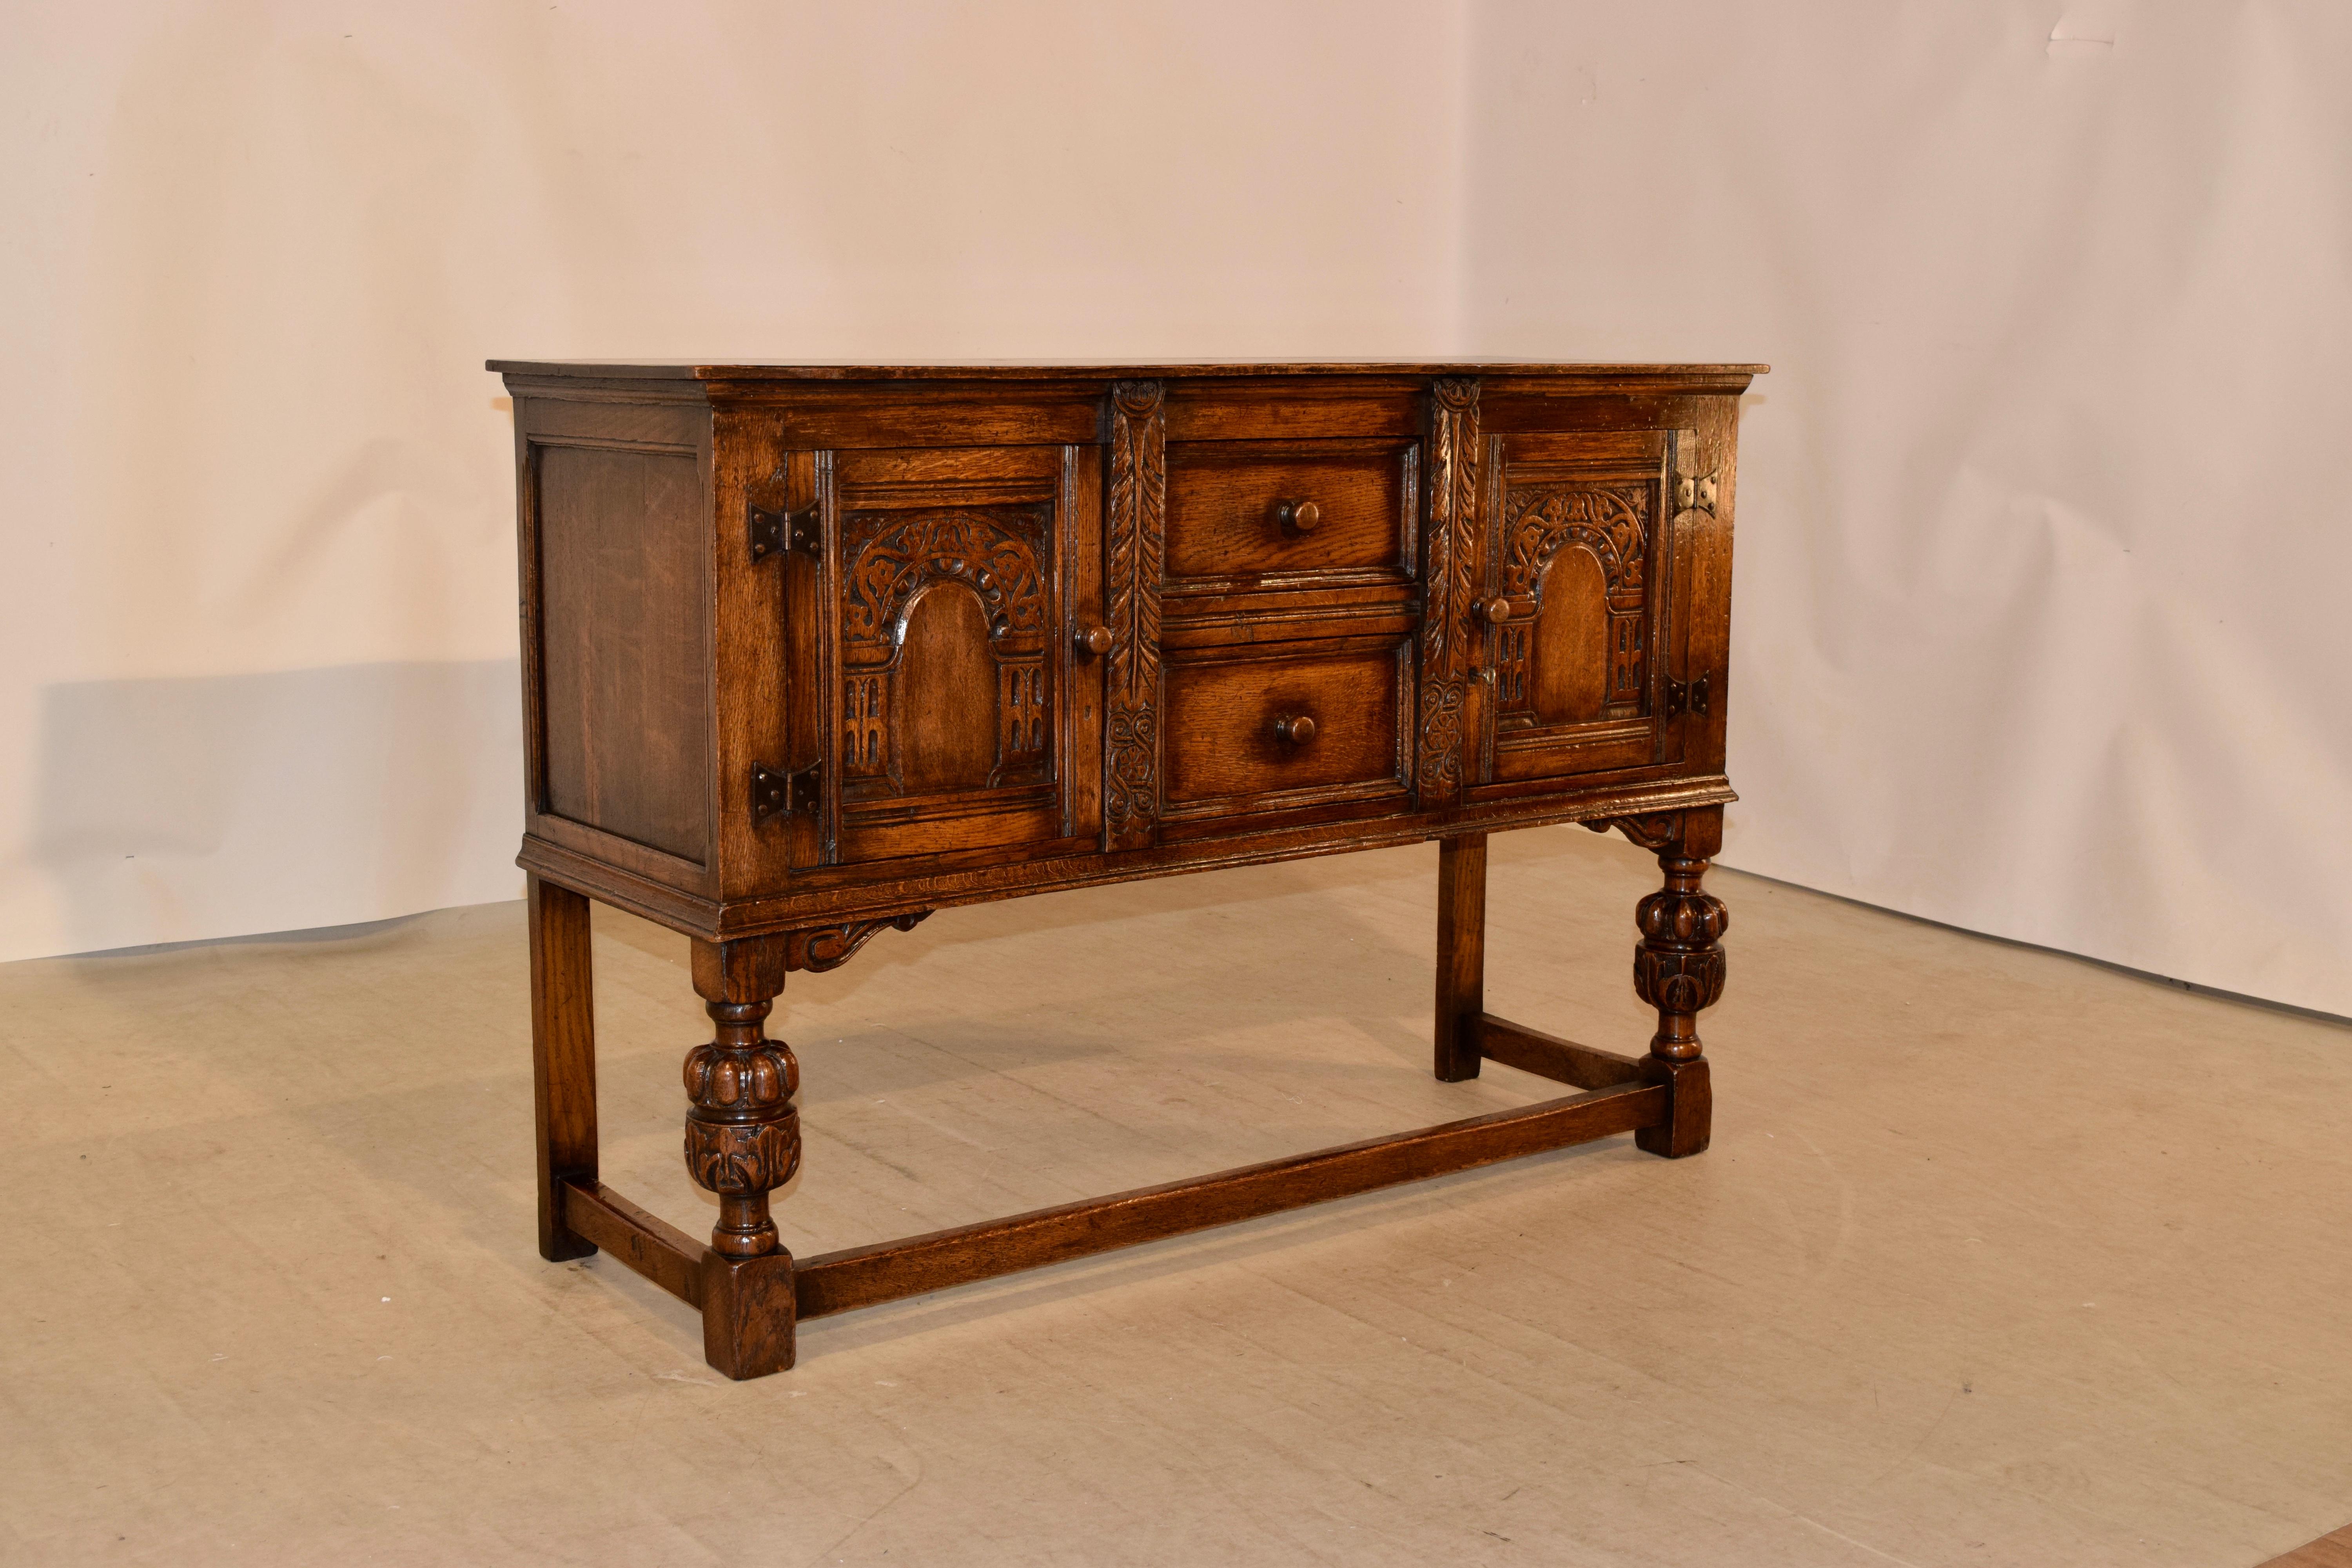 Late 19th century Ipswitch oak server from England. The case contains two central drawers flanked by single doors, which open to reveal storage over hand turned and carved legs in the front and simple legs in the back for easy placement against a